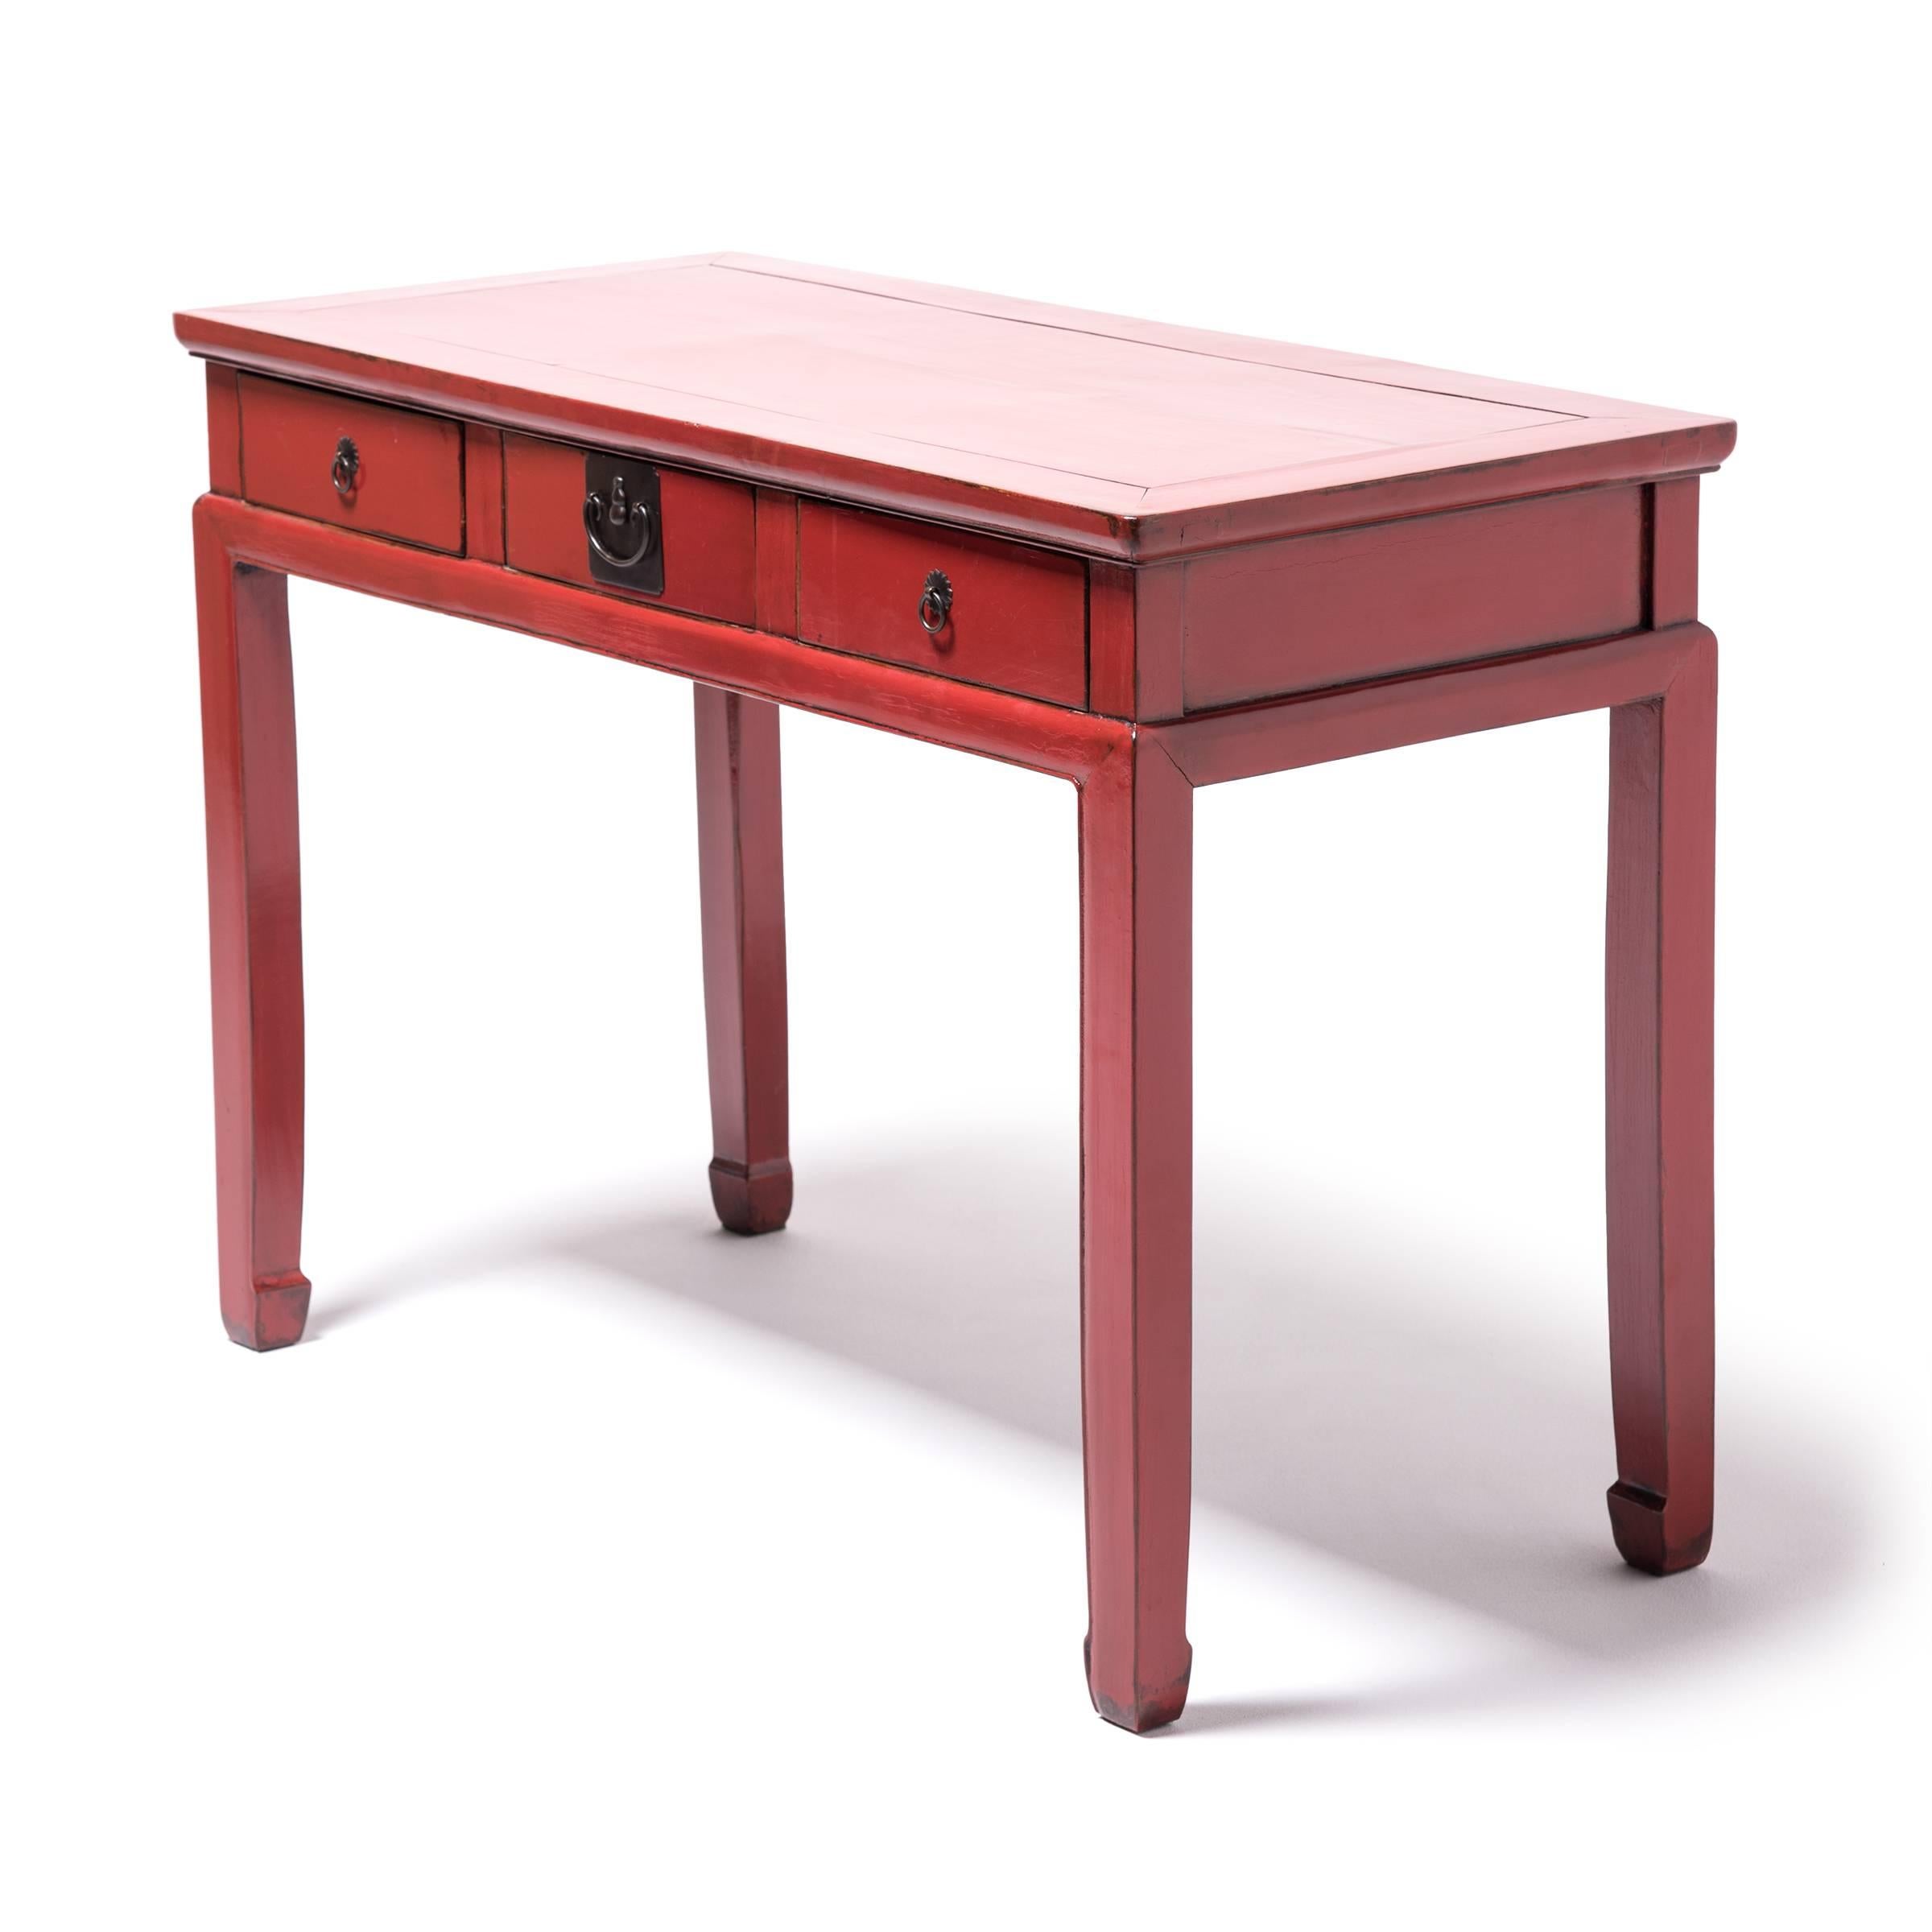 With its clean tabletop and roomy leg space, this table, modified from a 19th century design, creates the perfect space for your laptop, writing letters or greeting visitors in the foyer. Recently re-lacquered, the table revisits the vibrant red of